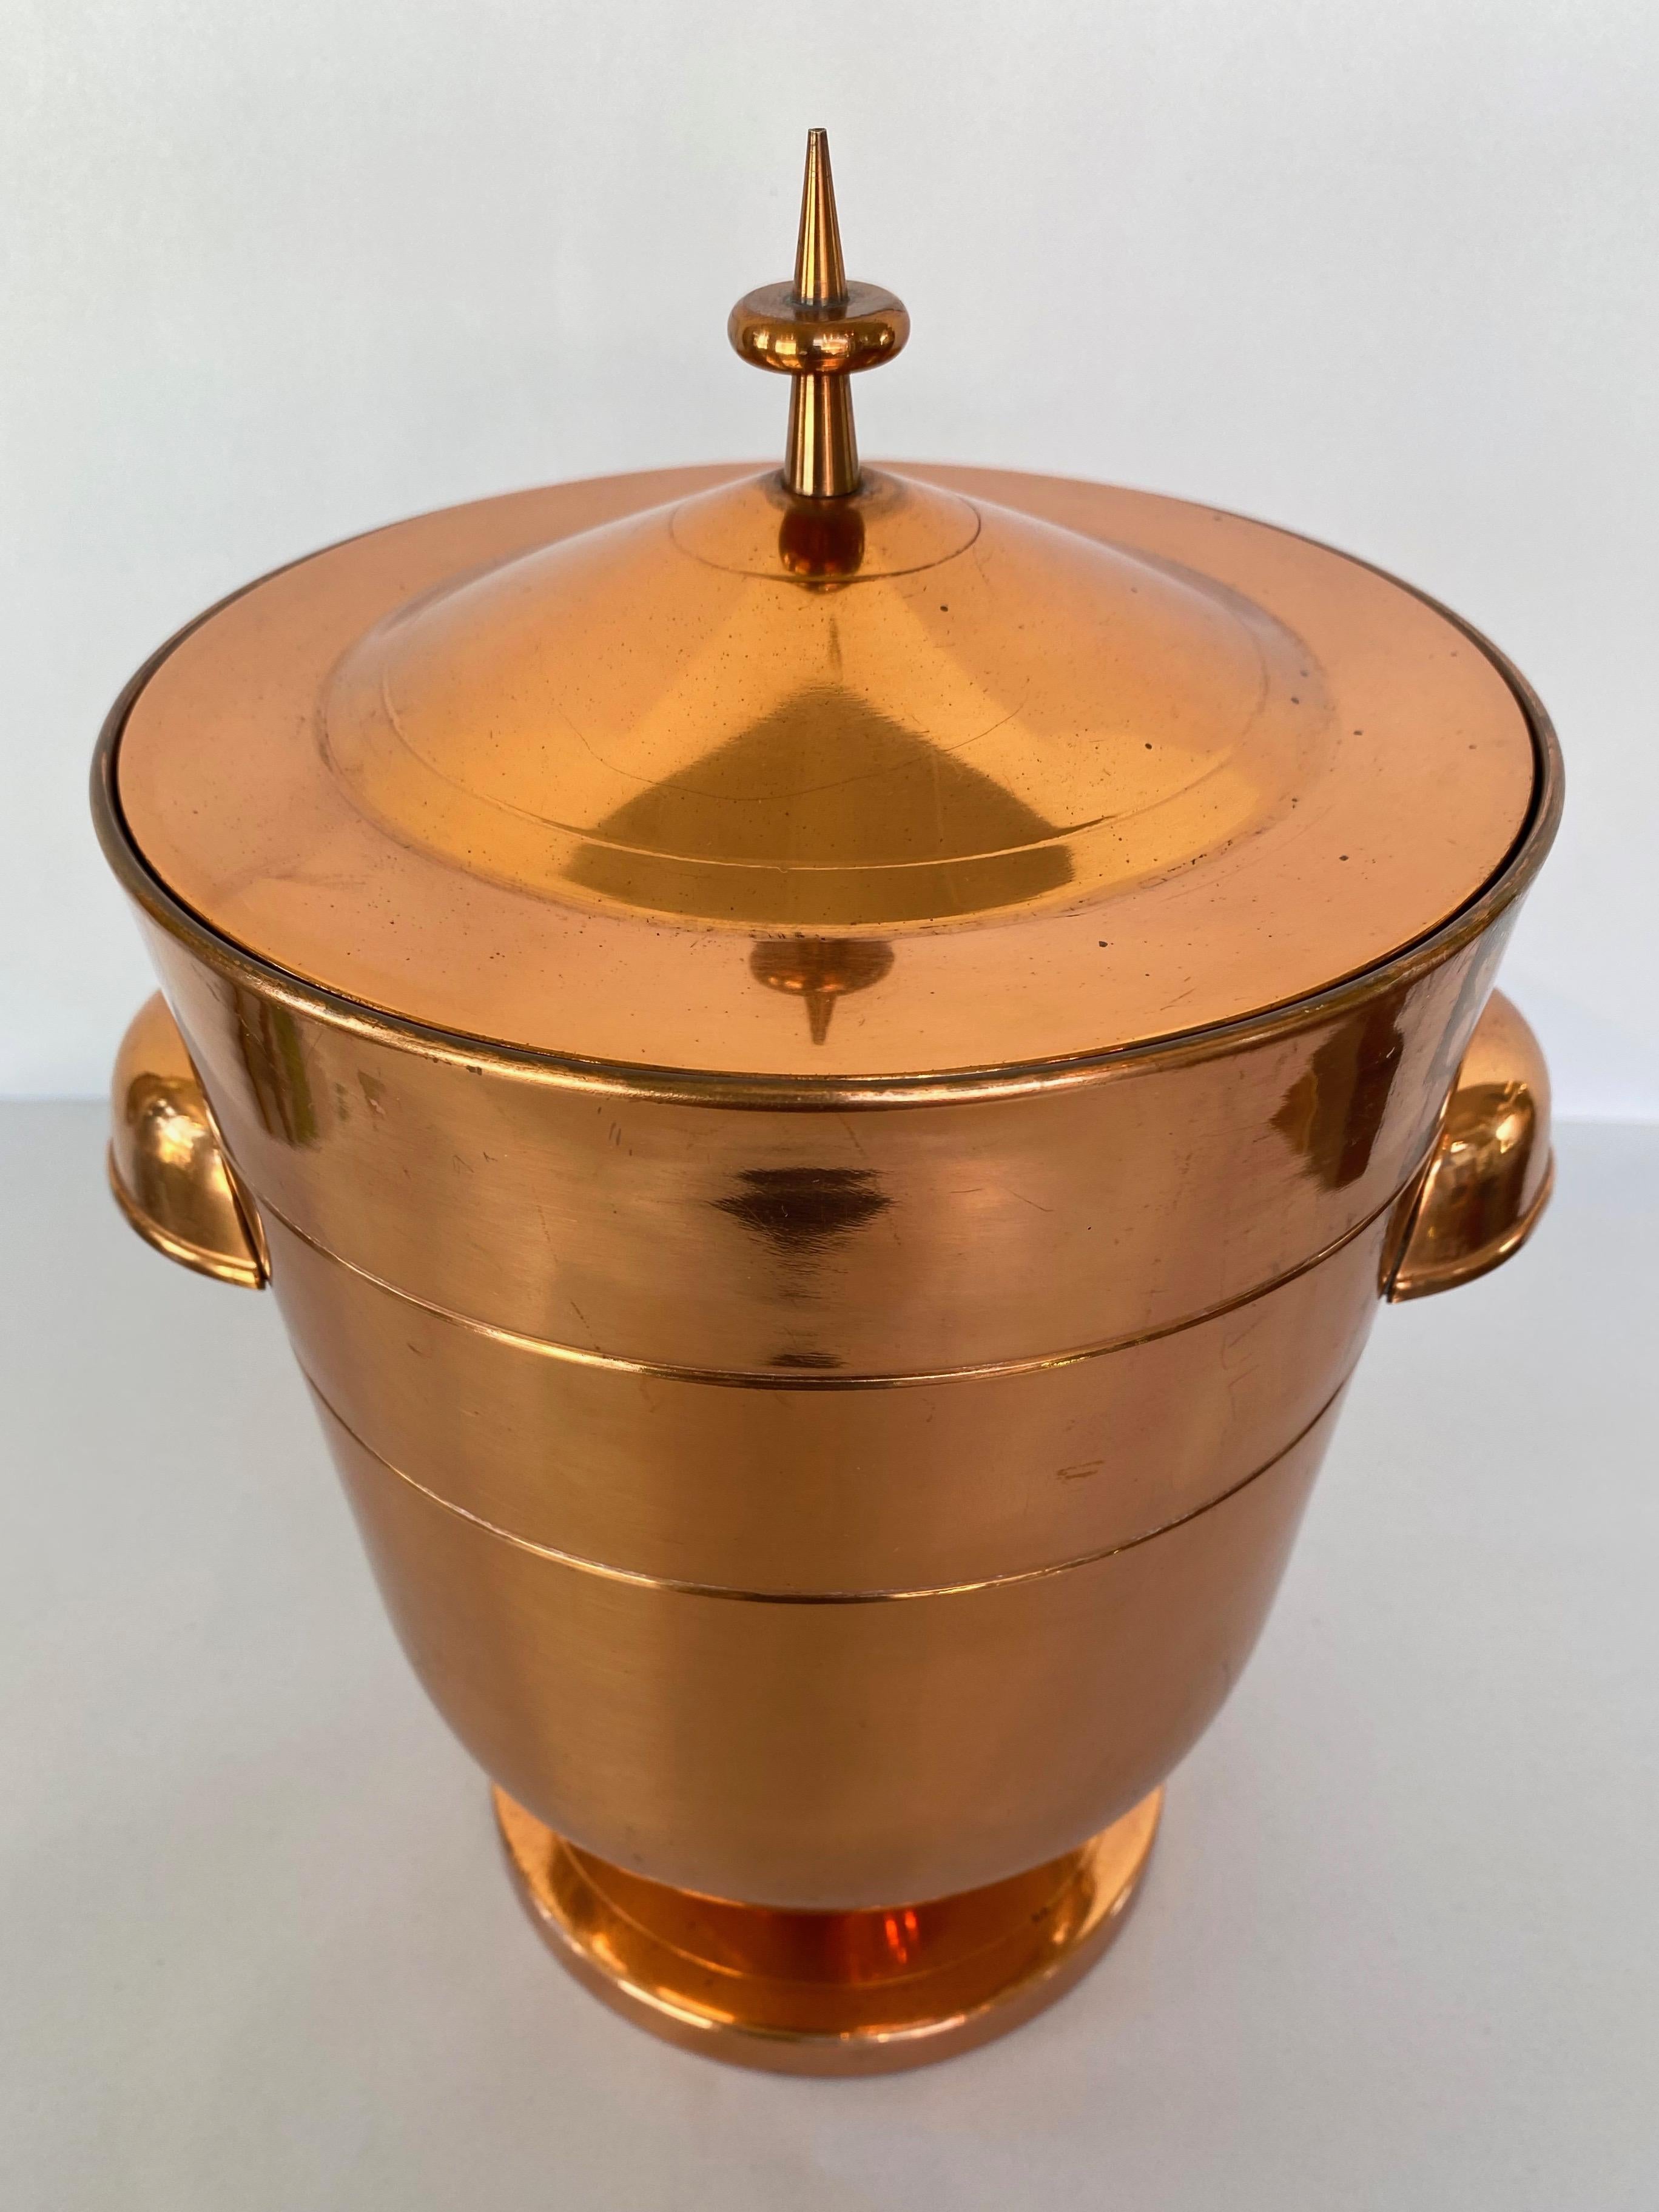 A striking 1950s rare copper ice bucket or champagne & wine cooler with lid by Tommi Parzinger.

Very seldom seen bright copper finish with protective lacquer clear coat. Lid features Parzinger’s signature spike & saucer finial detail. On a